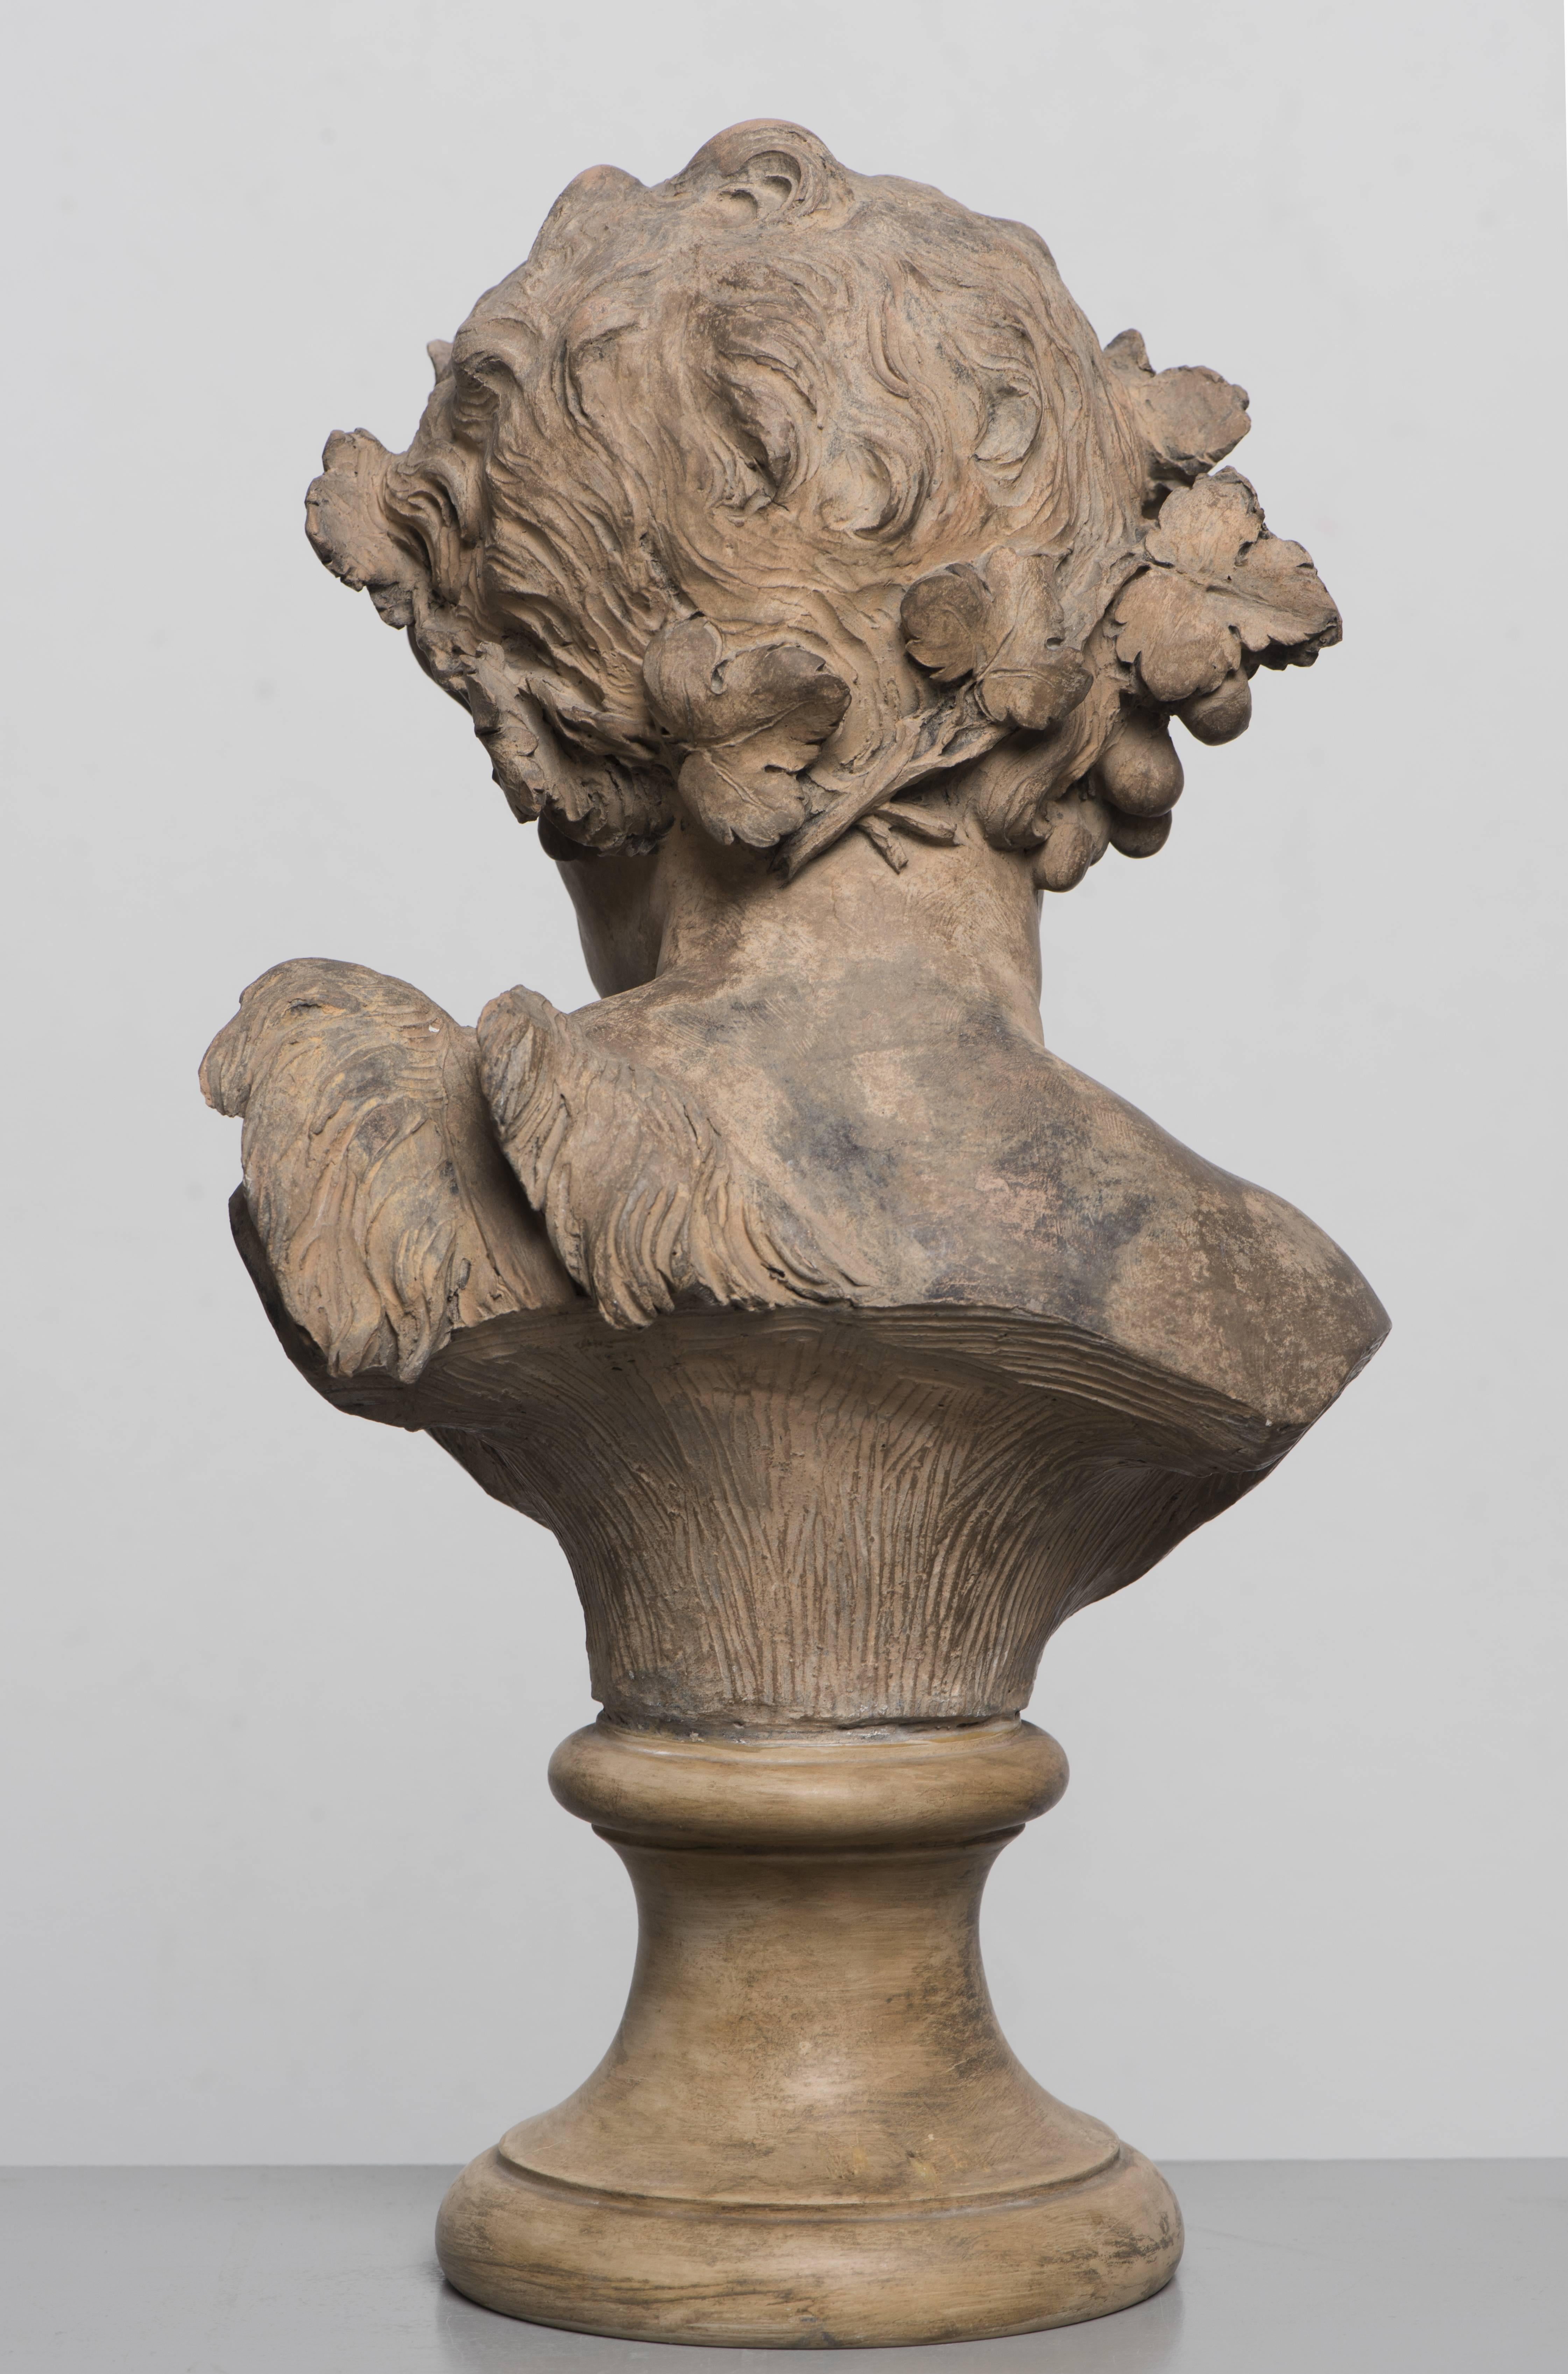 Louis-Claude Vassé (1717-1772), French sculptor.
The young faun figured in full round, fine patina, on circular marble stand
Measures: total height 42 cm. x 22 cm x 15 cm. (16.50 in. x 8.75 in. 6 in.)
The height of the bust only: 31